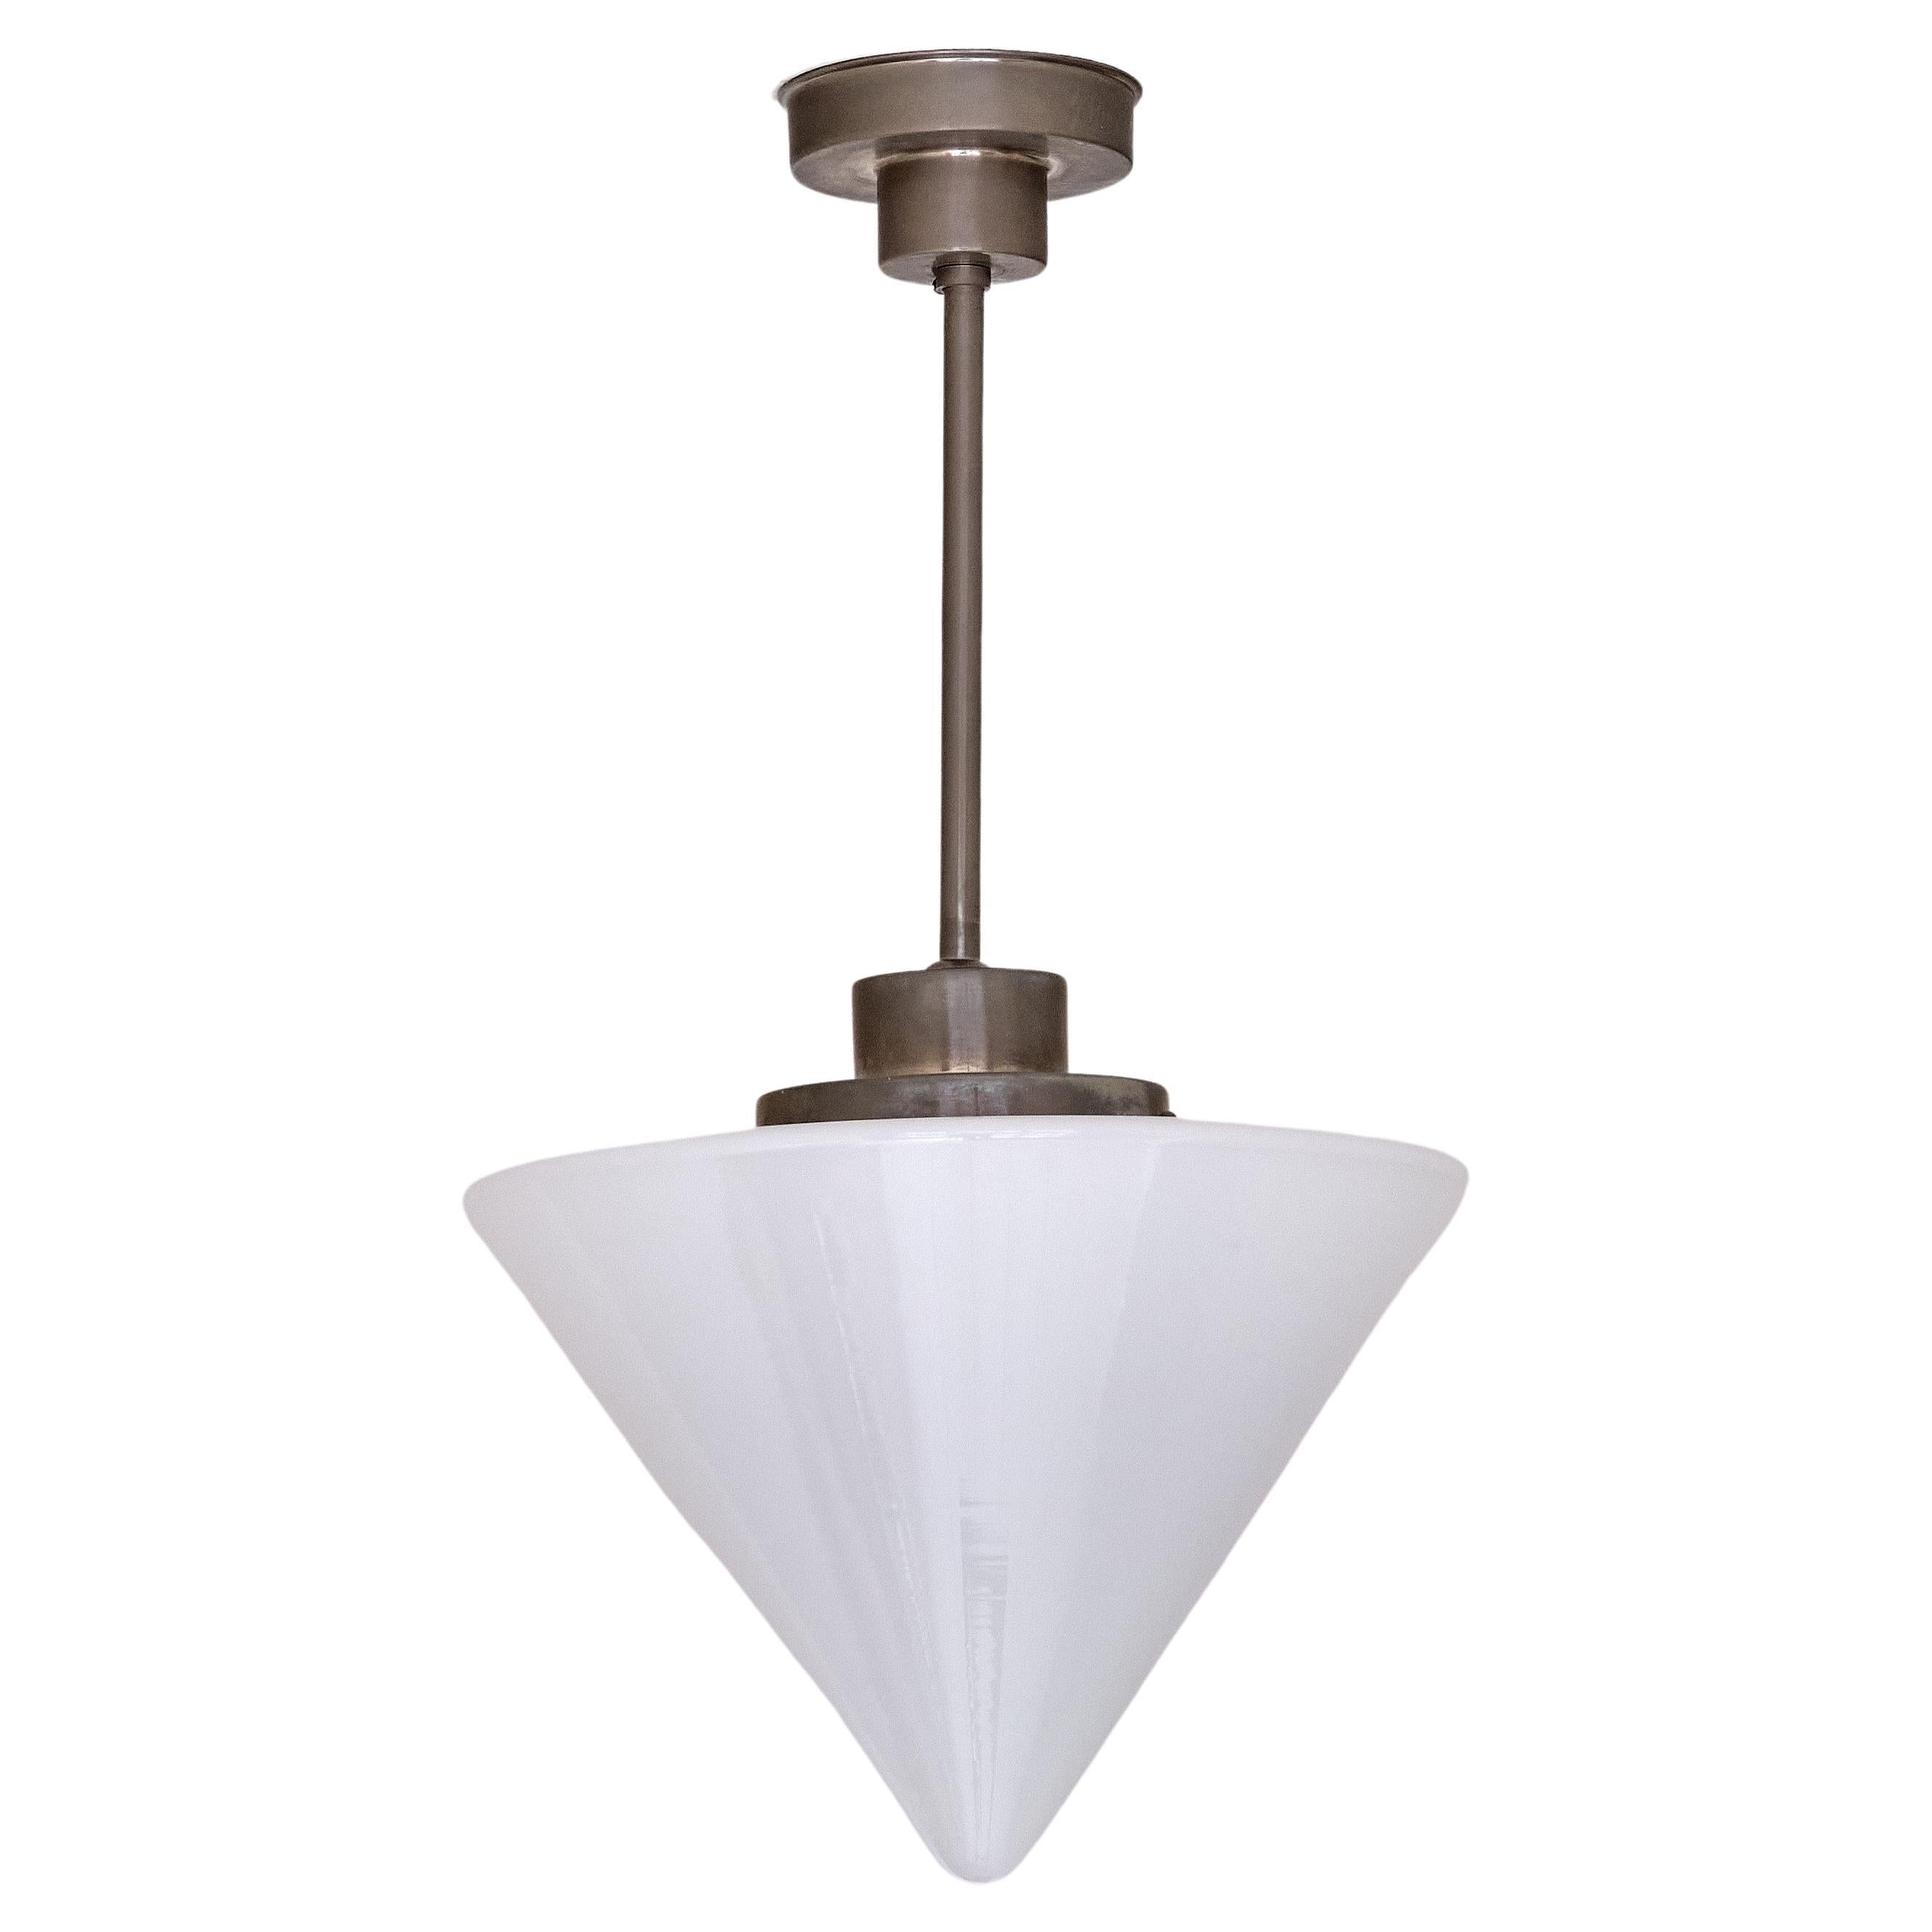 Gispen Cone Shaped Pendant Light in Opal Glass and Nickel, Netherlands, 1930s For Sale